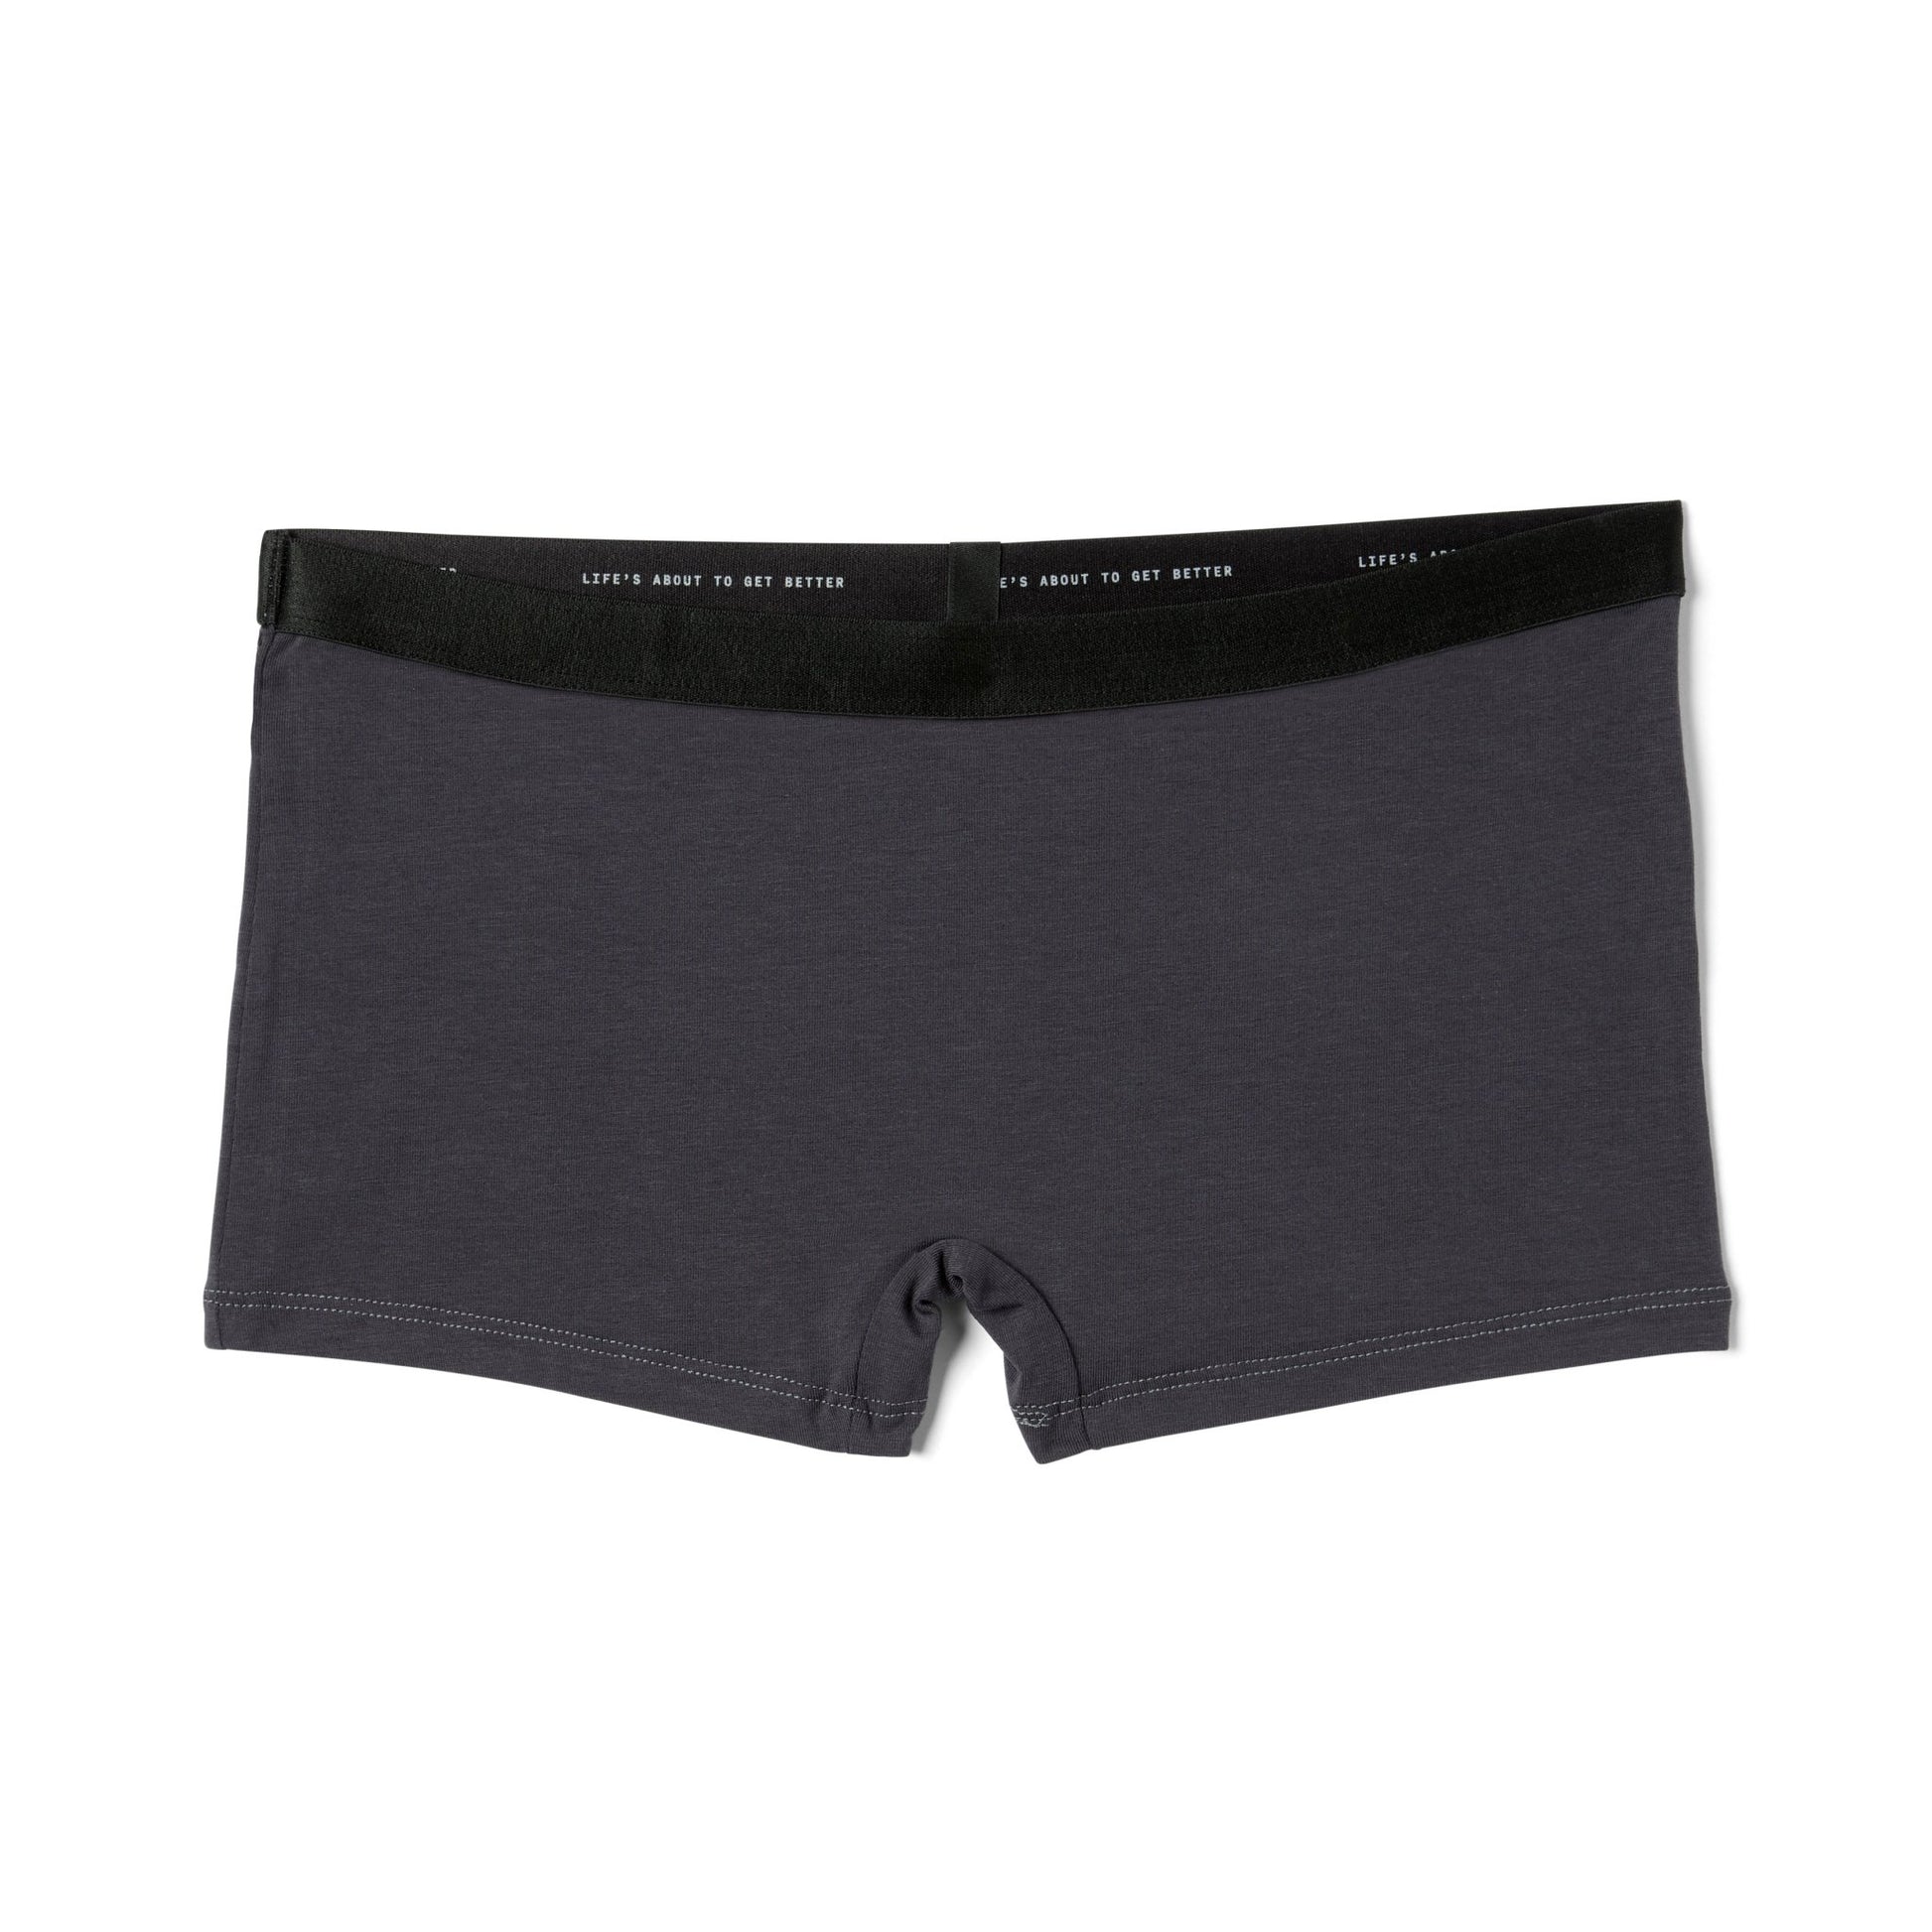 A super comfortable Better Cotton Boyshort with black trim from Better Clothing Company.